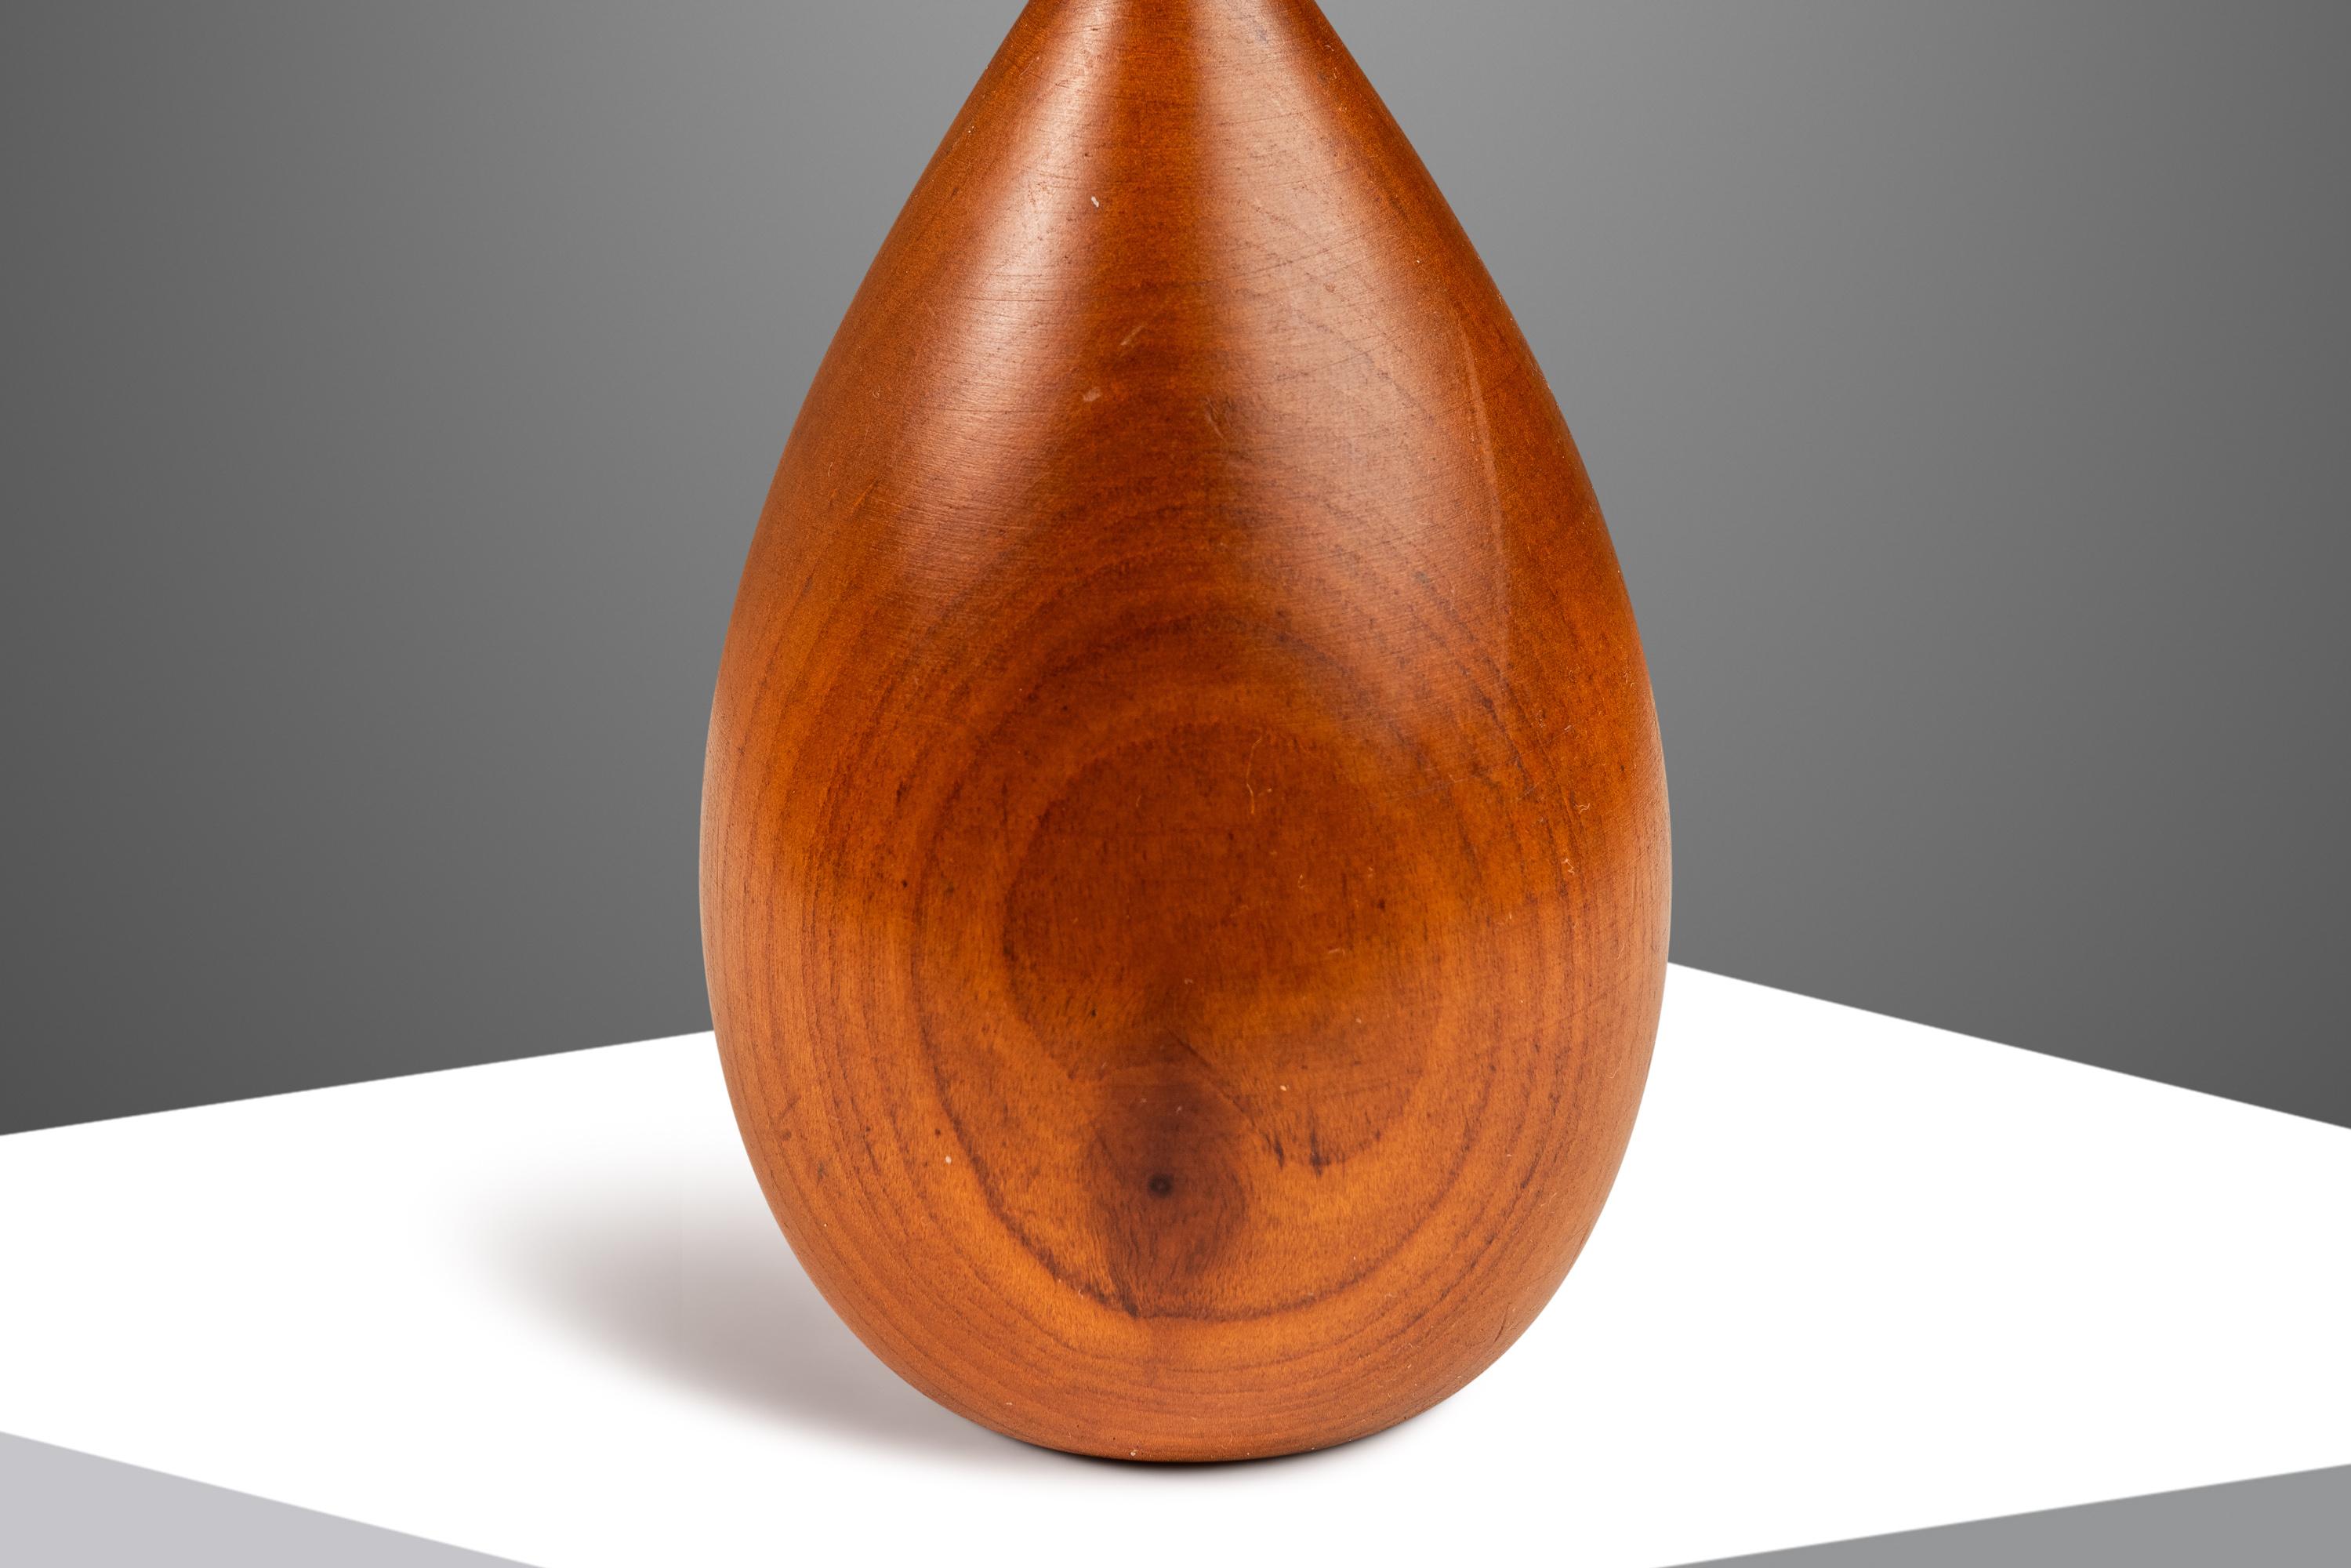 Signed Petite Wood-Turned Vase in solid Walnut by George Biersdorf, USA, c. 1979 For Sale 5